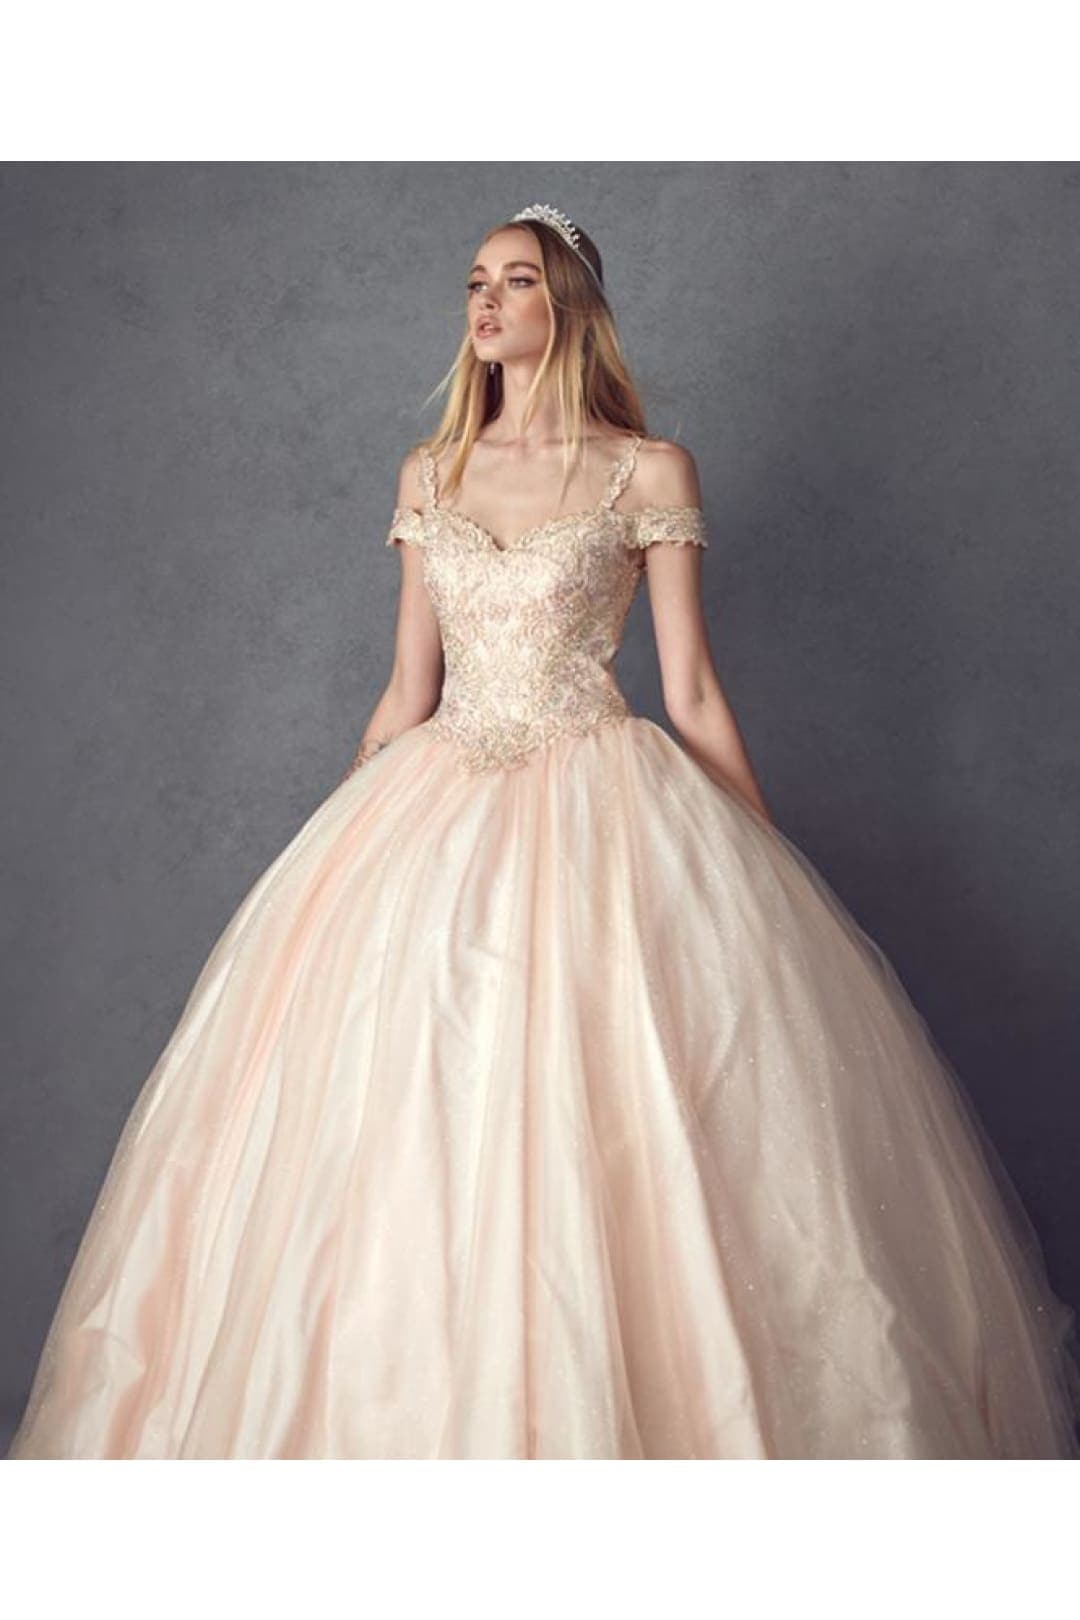 Embellished Quinceanera Ball Formal Gown - BLUSH / XS